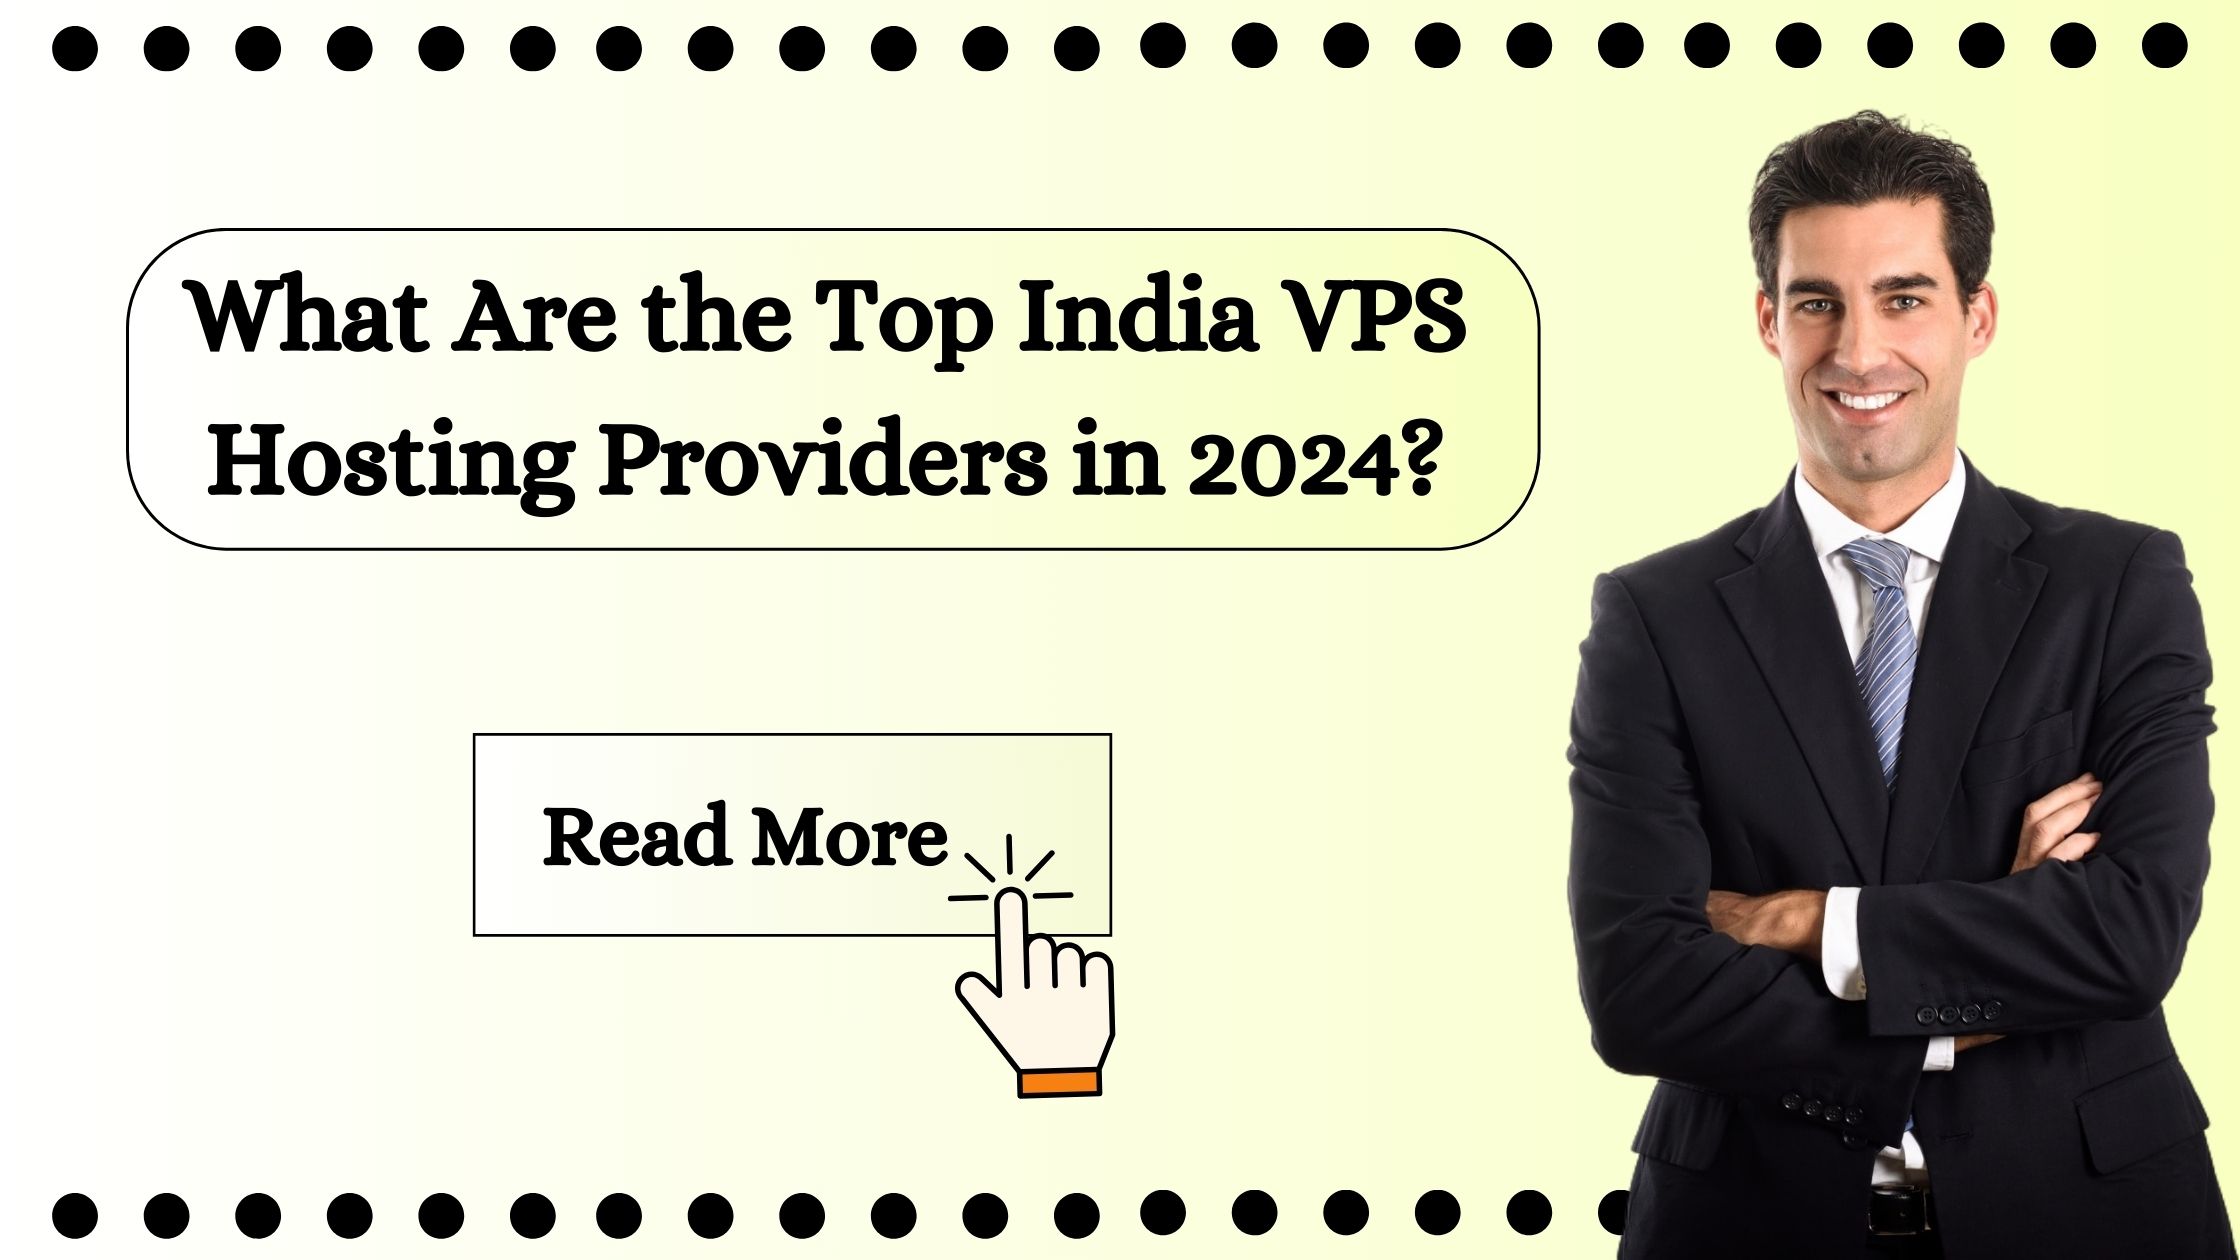 What Are the Top India VPS Hosting Providers in 2024?